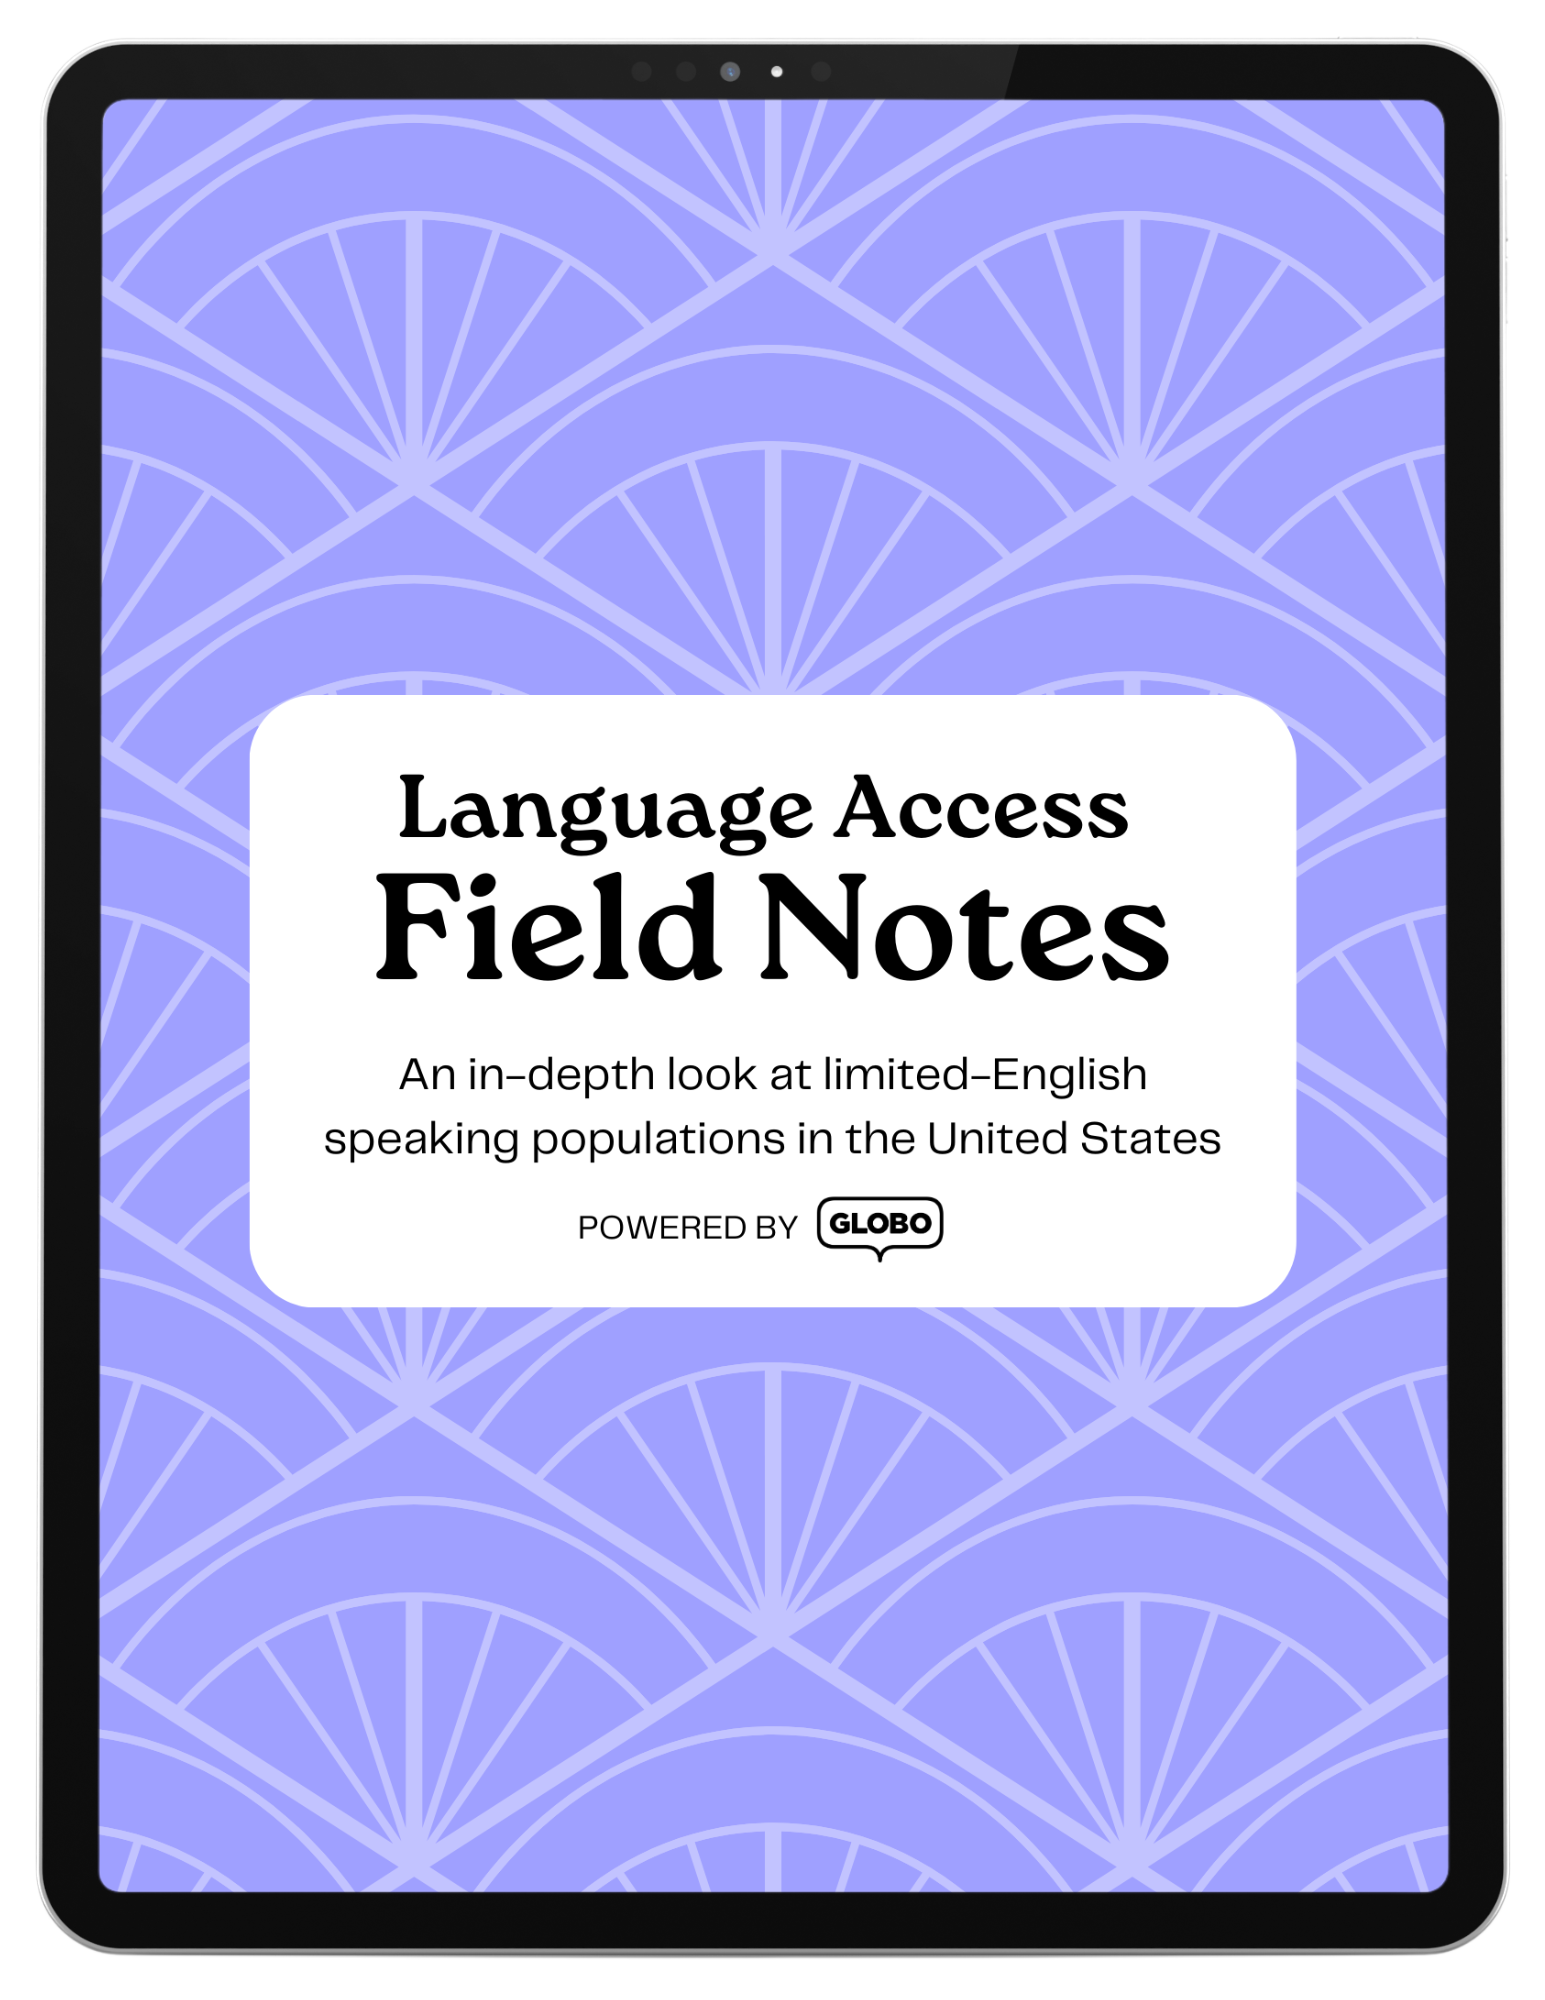 Language Access Field Notes Guide loaded on an iPad